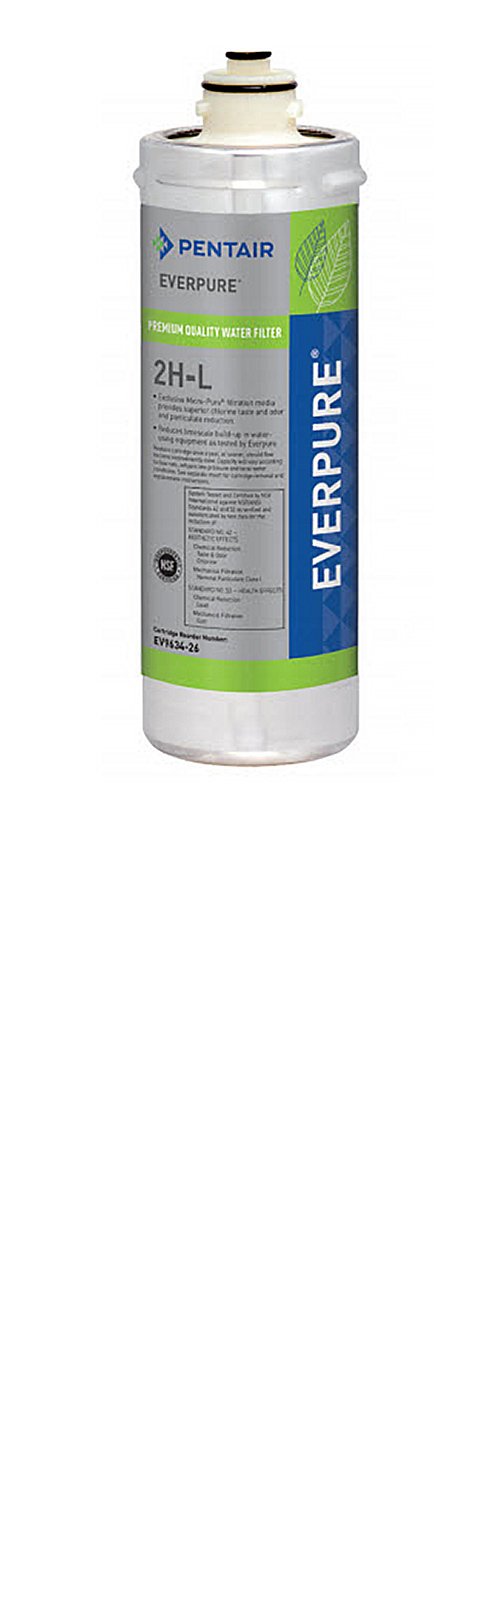 Everpure 2H-L Water Filter Replacement Cartridge 2-Pack